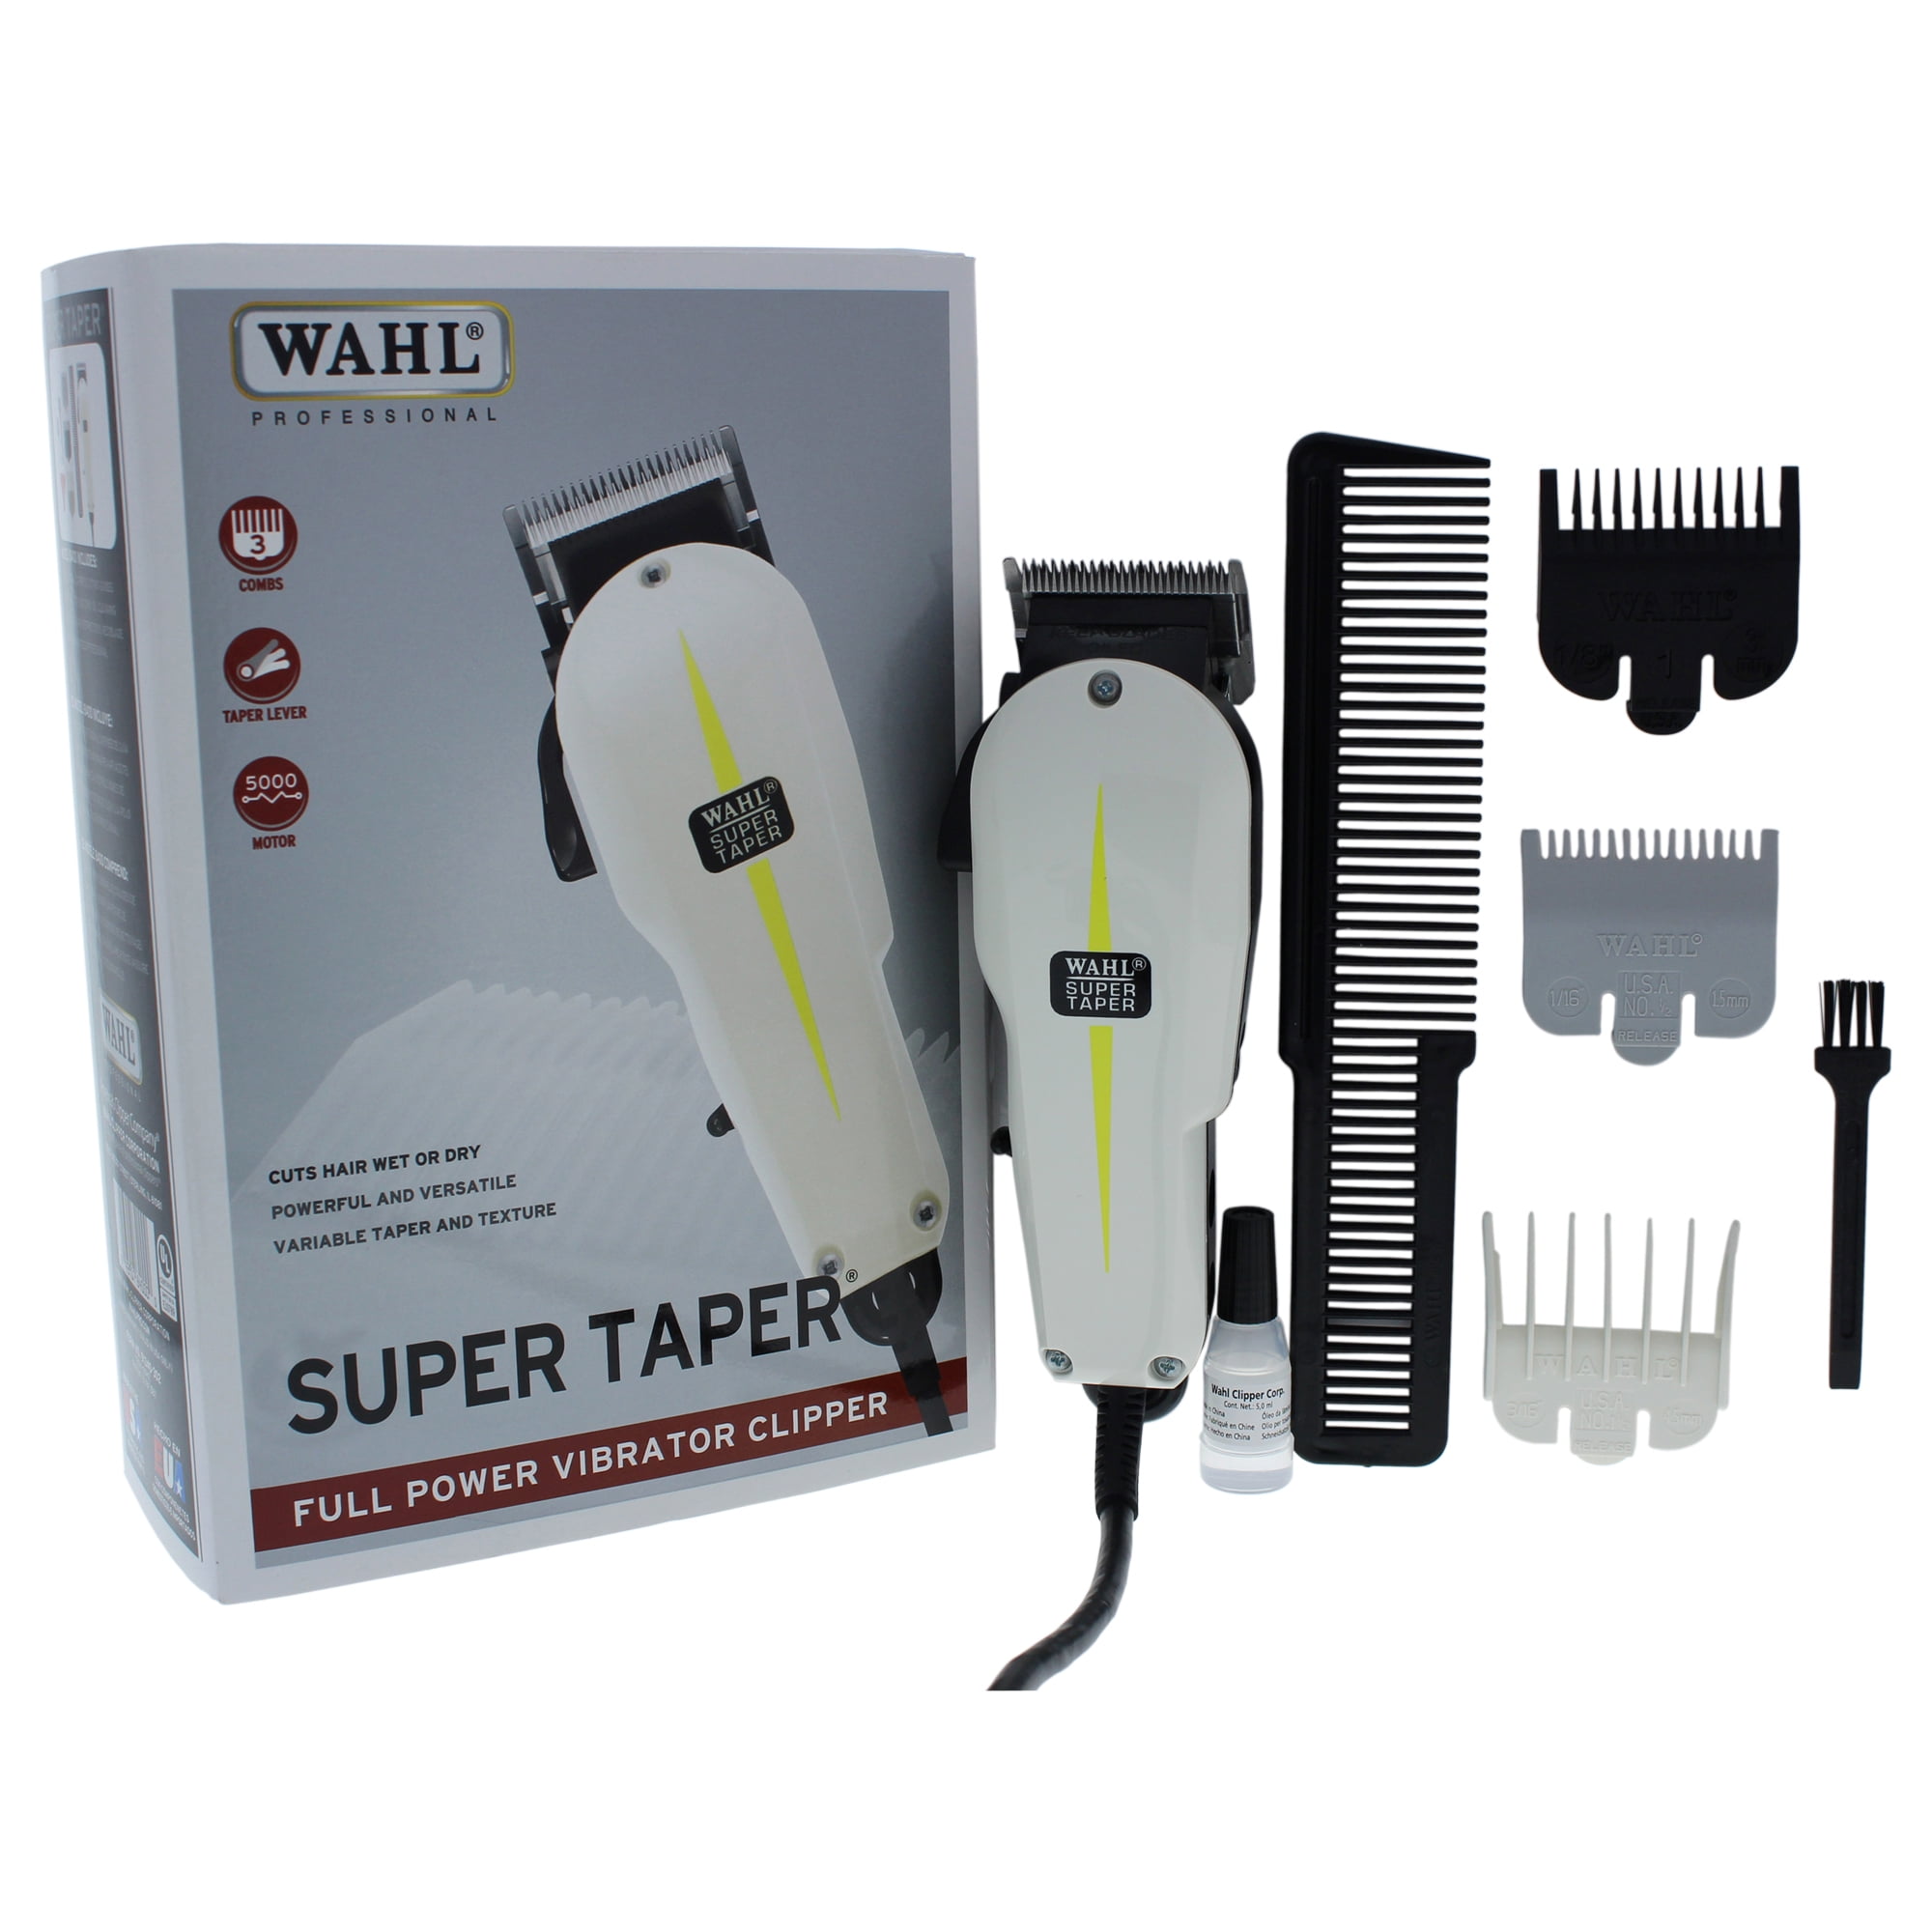 Wahl Professional Super Taper Hair Clipper with Full Power and V5000  Electromagnetic Motor for Professional Barbers and Stylists - Model 8400